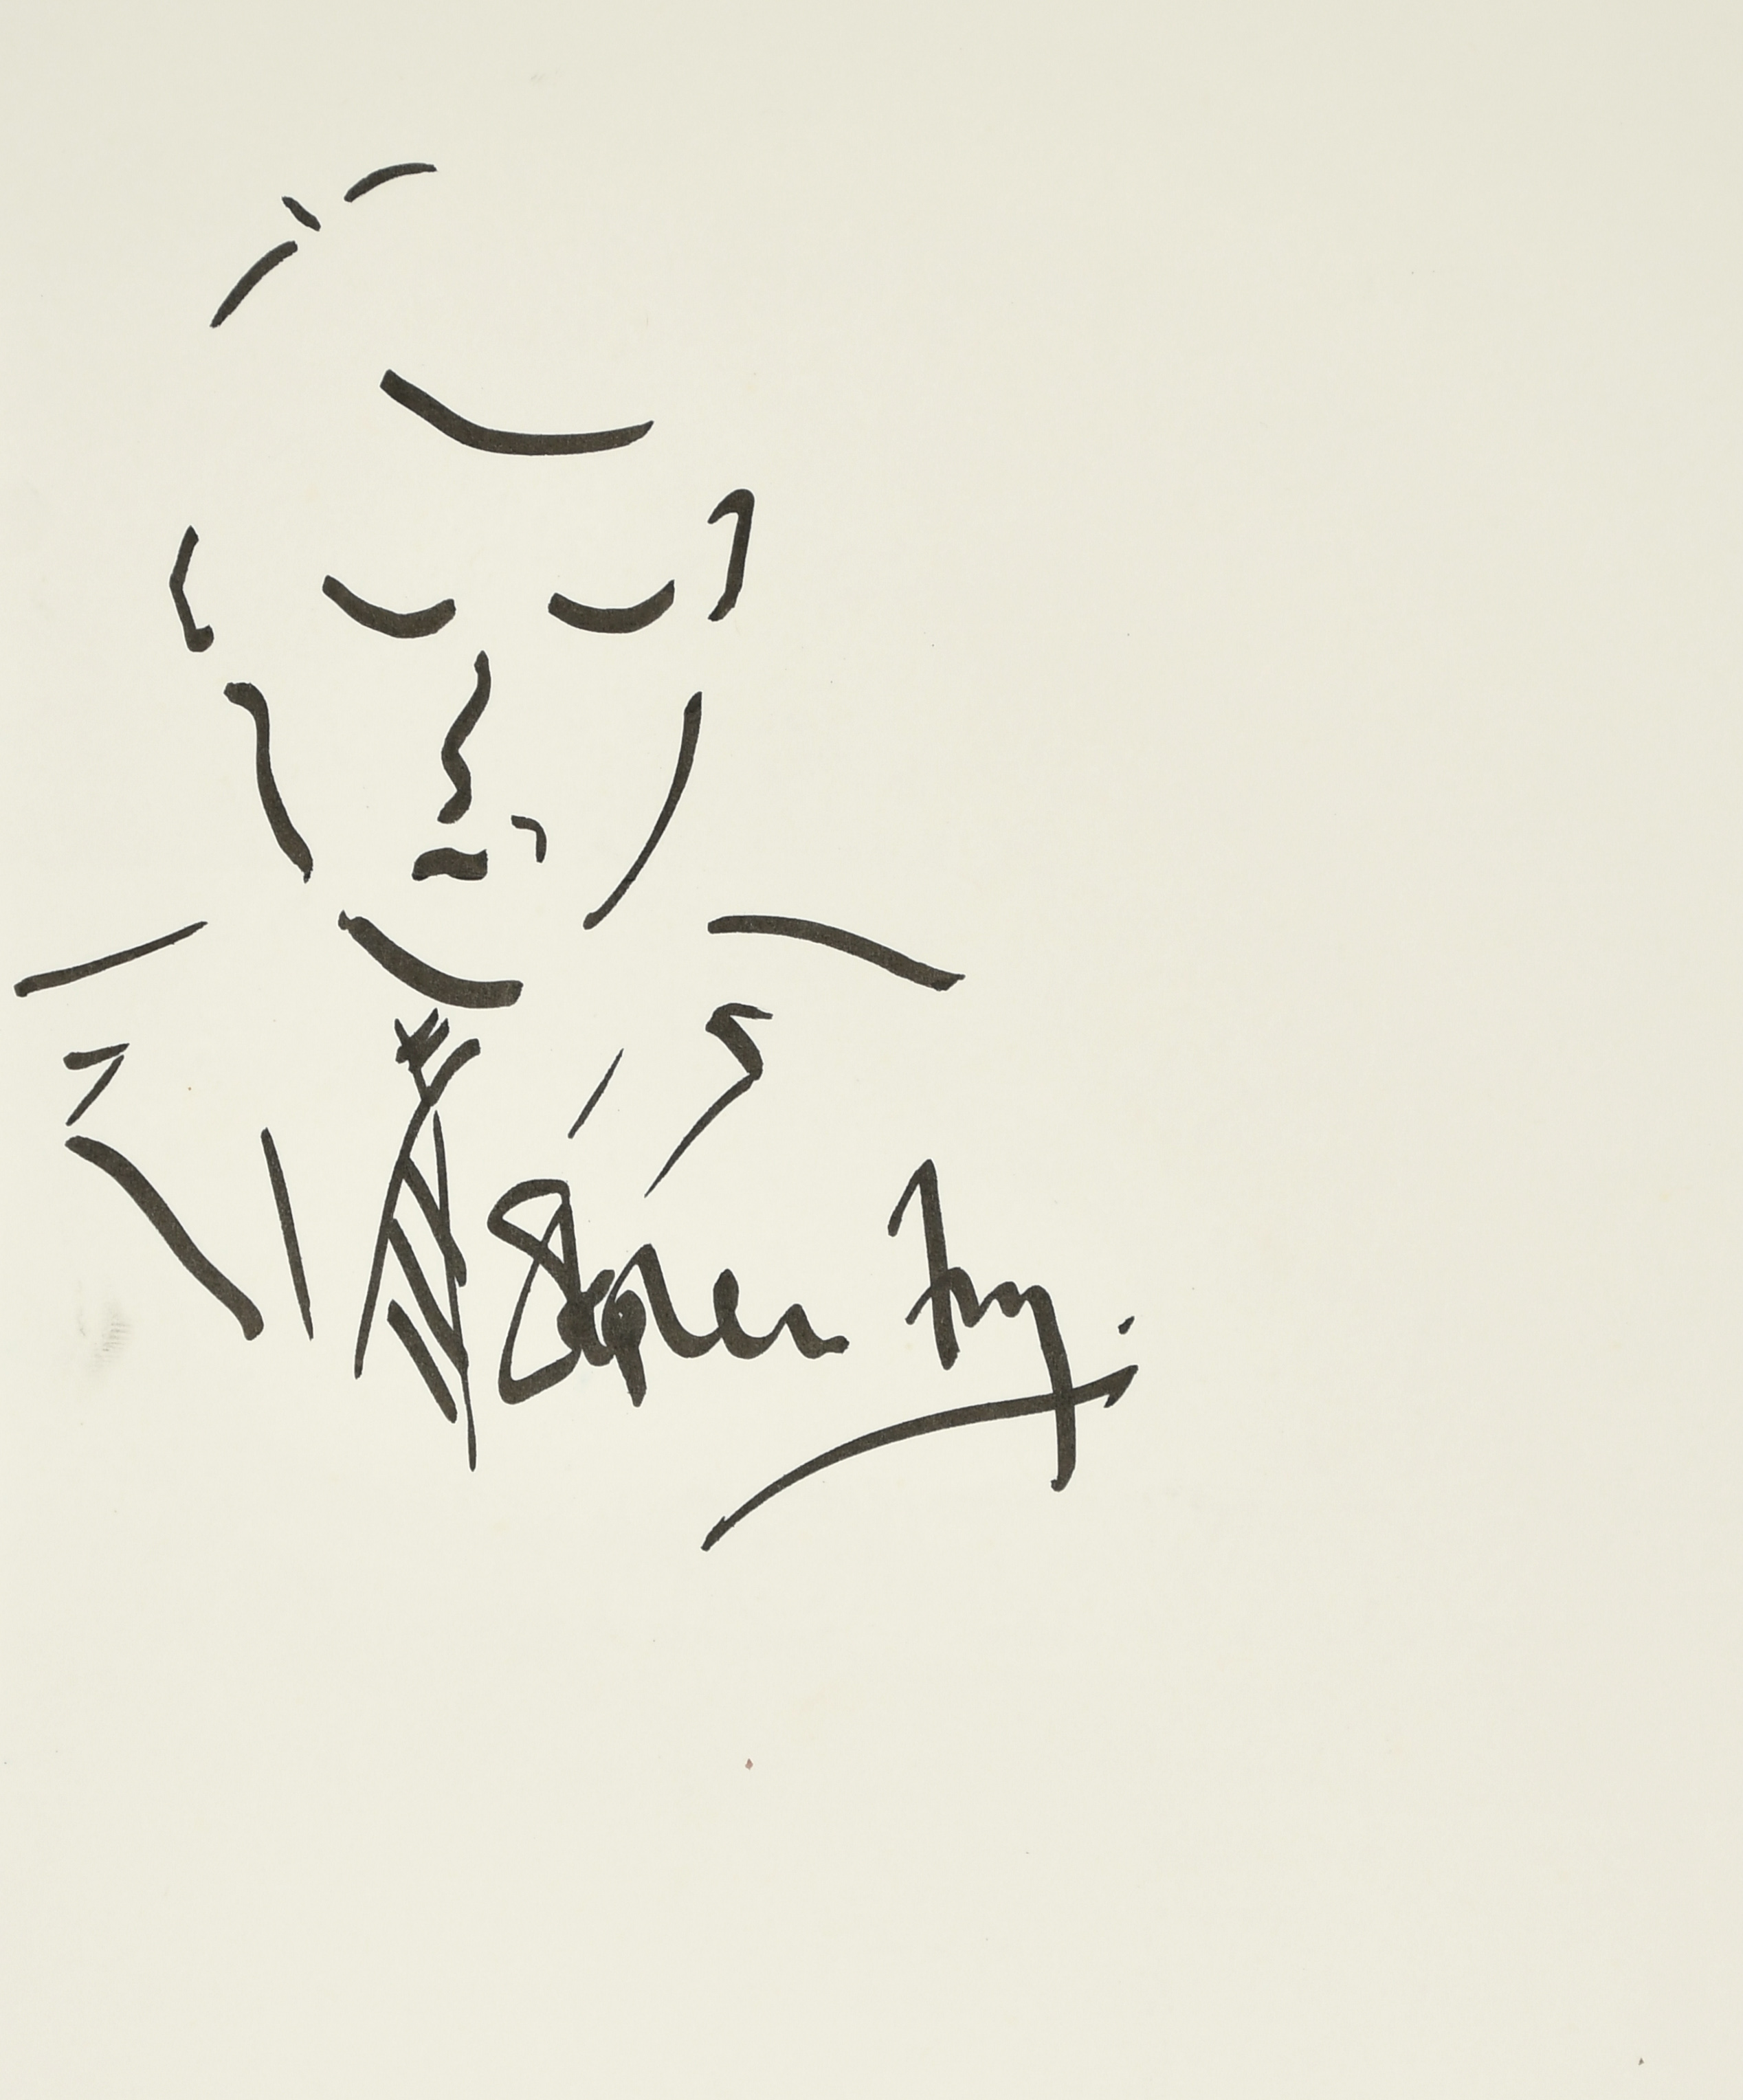 Stephen Fry (Comedian, Actor, Author b.1957). A Self Portrait, Ink, Signed, Unframed 9.75" x 8" (